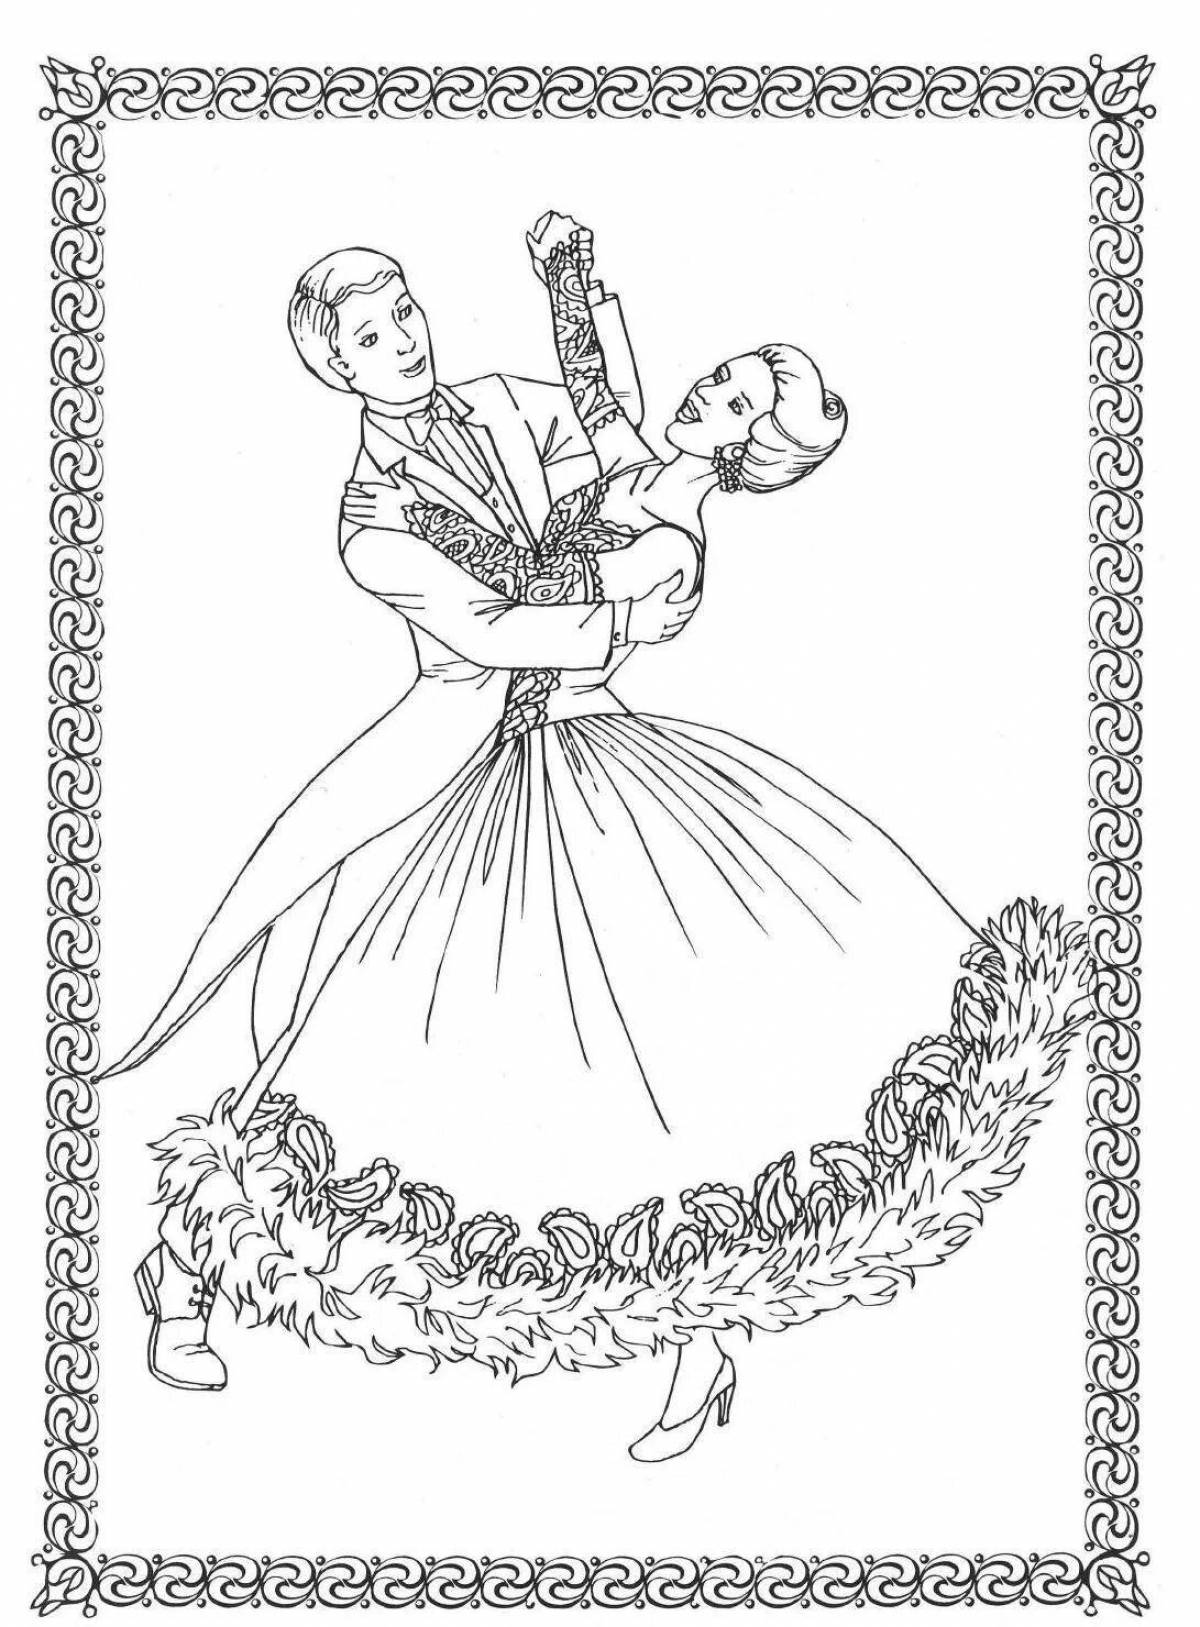 Coloring page festive polka dance